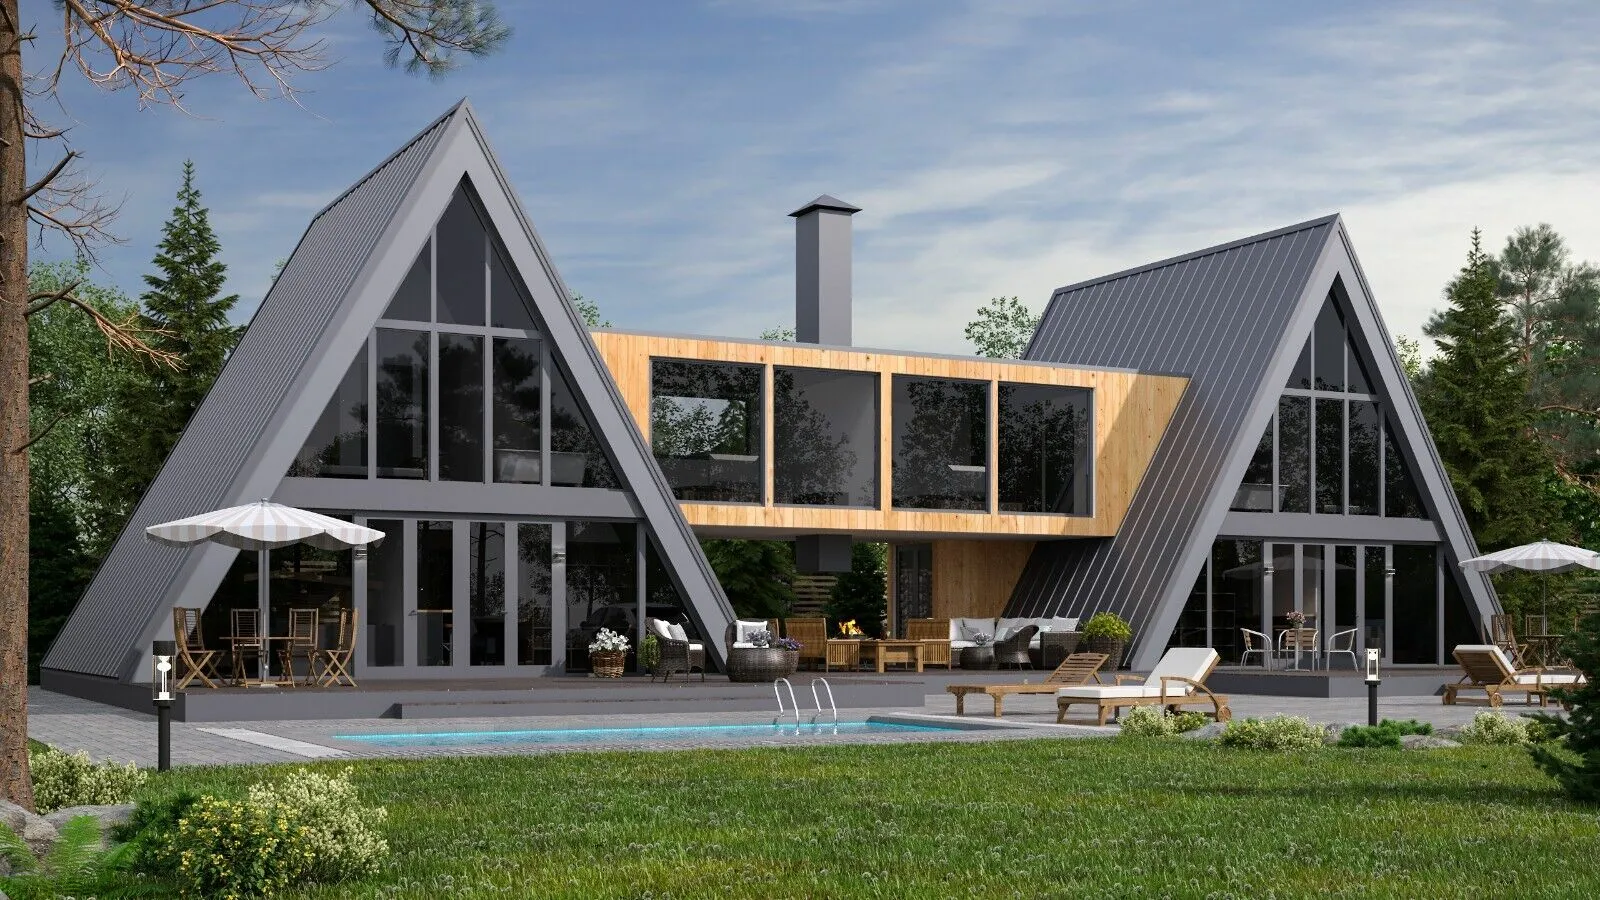 A-Frame House Architecture Plans PDF Download